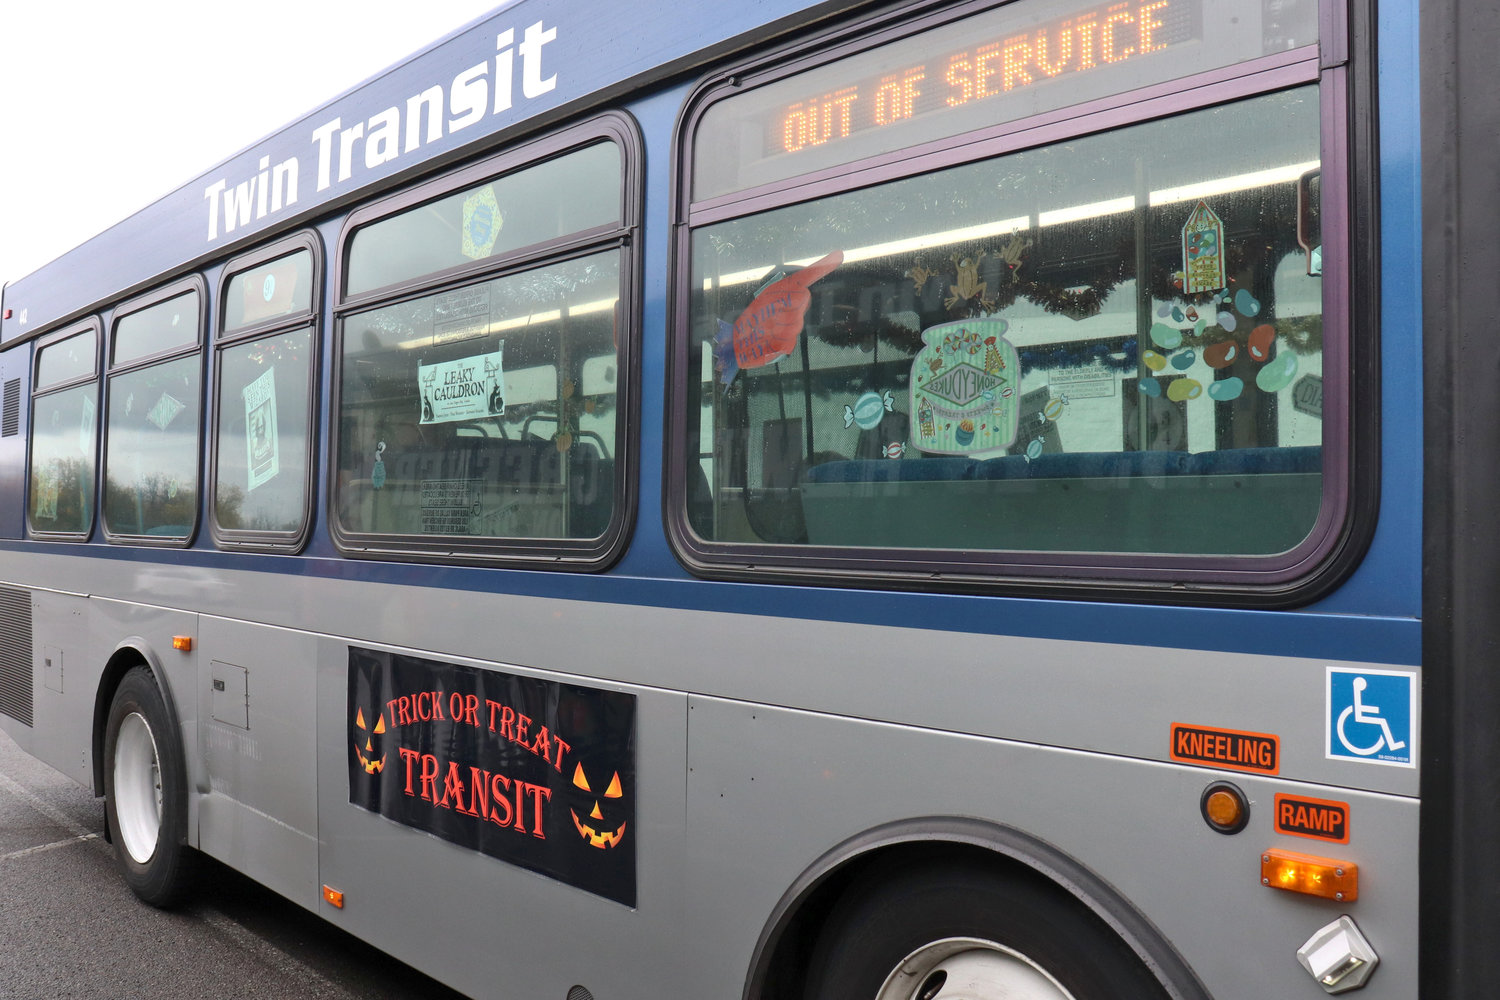 Twin Transit decorated several of its buses for Trick or Treat Transit on Monday. Trick-or-treaters were invited to board the bus at the Lewis County Mall for free transportation between trick or treat spots in downtown Centralia, downtown Chehalis and the Twin City Town Center.